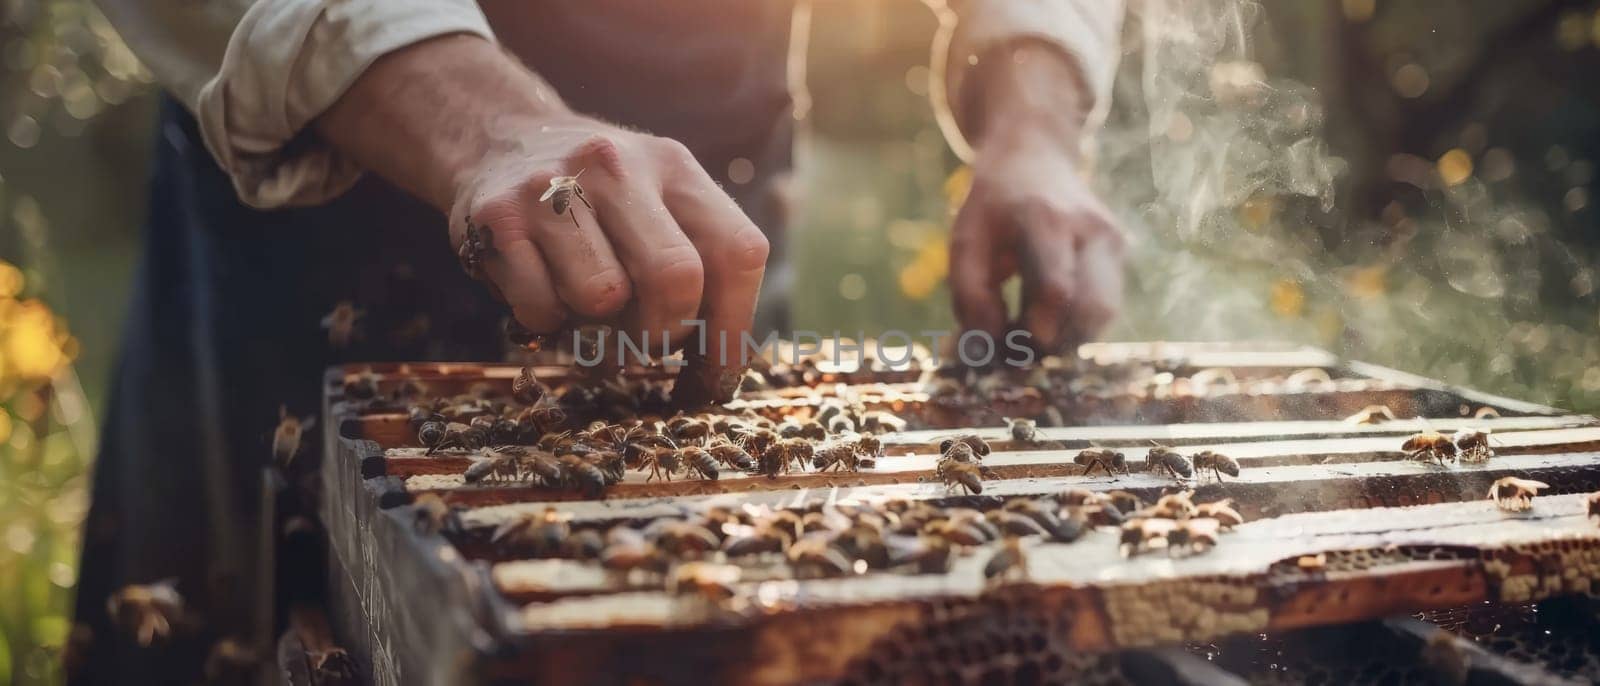 Amidst the autumnal hues, a beekeeper skillfully inspects honeycomb frames teeming with bees. The image captures the delicate balance of beekeeping and nature's cycle. by sfinks